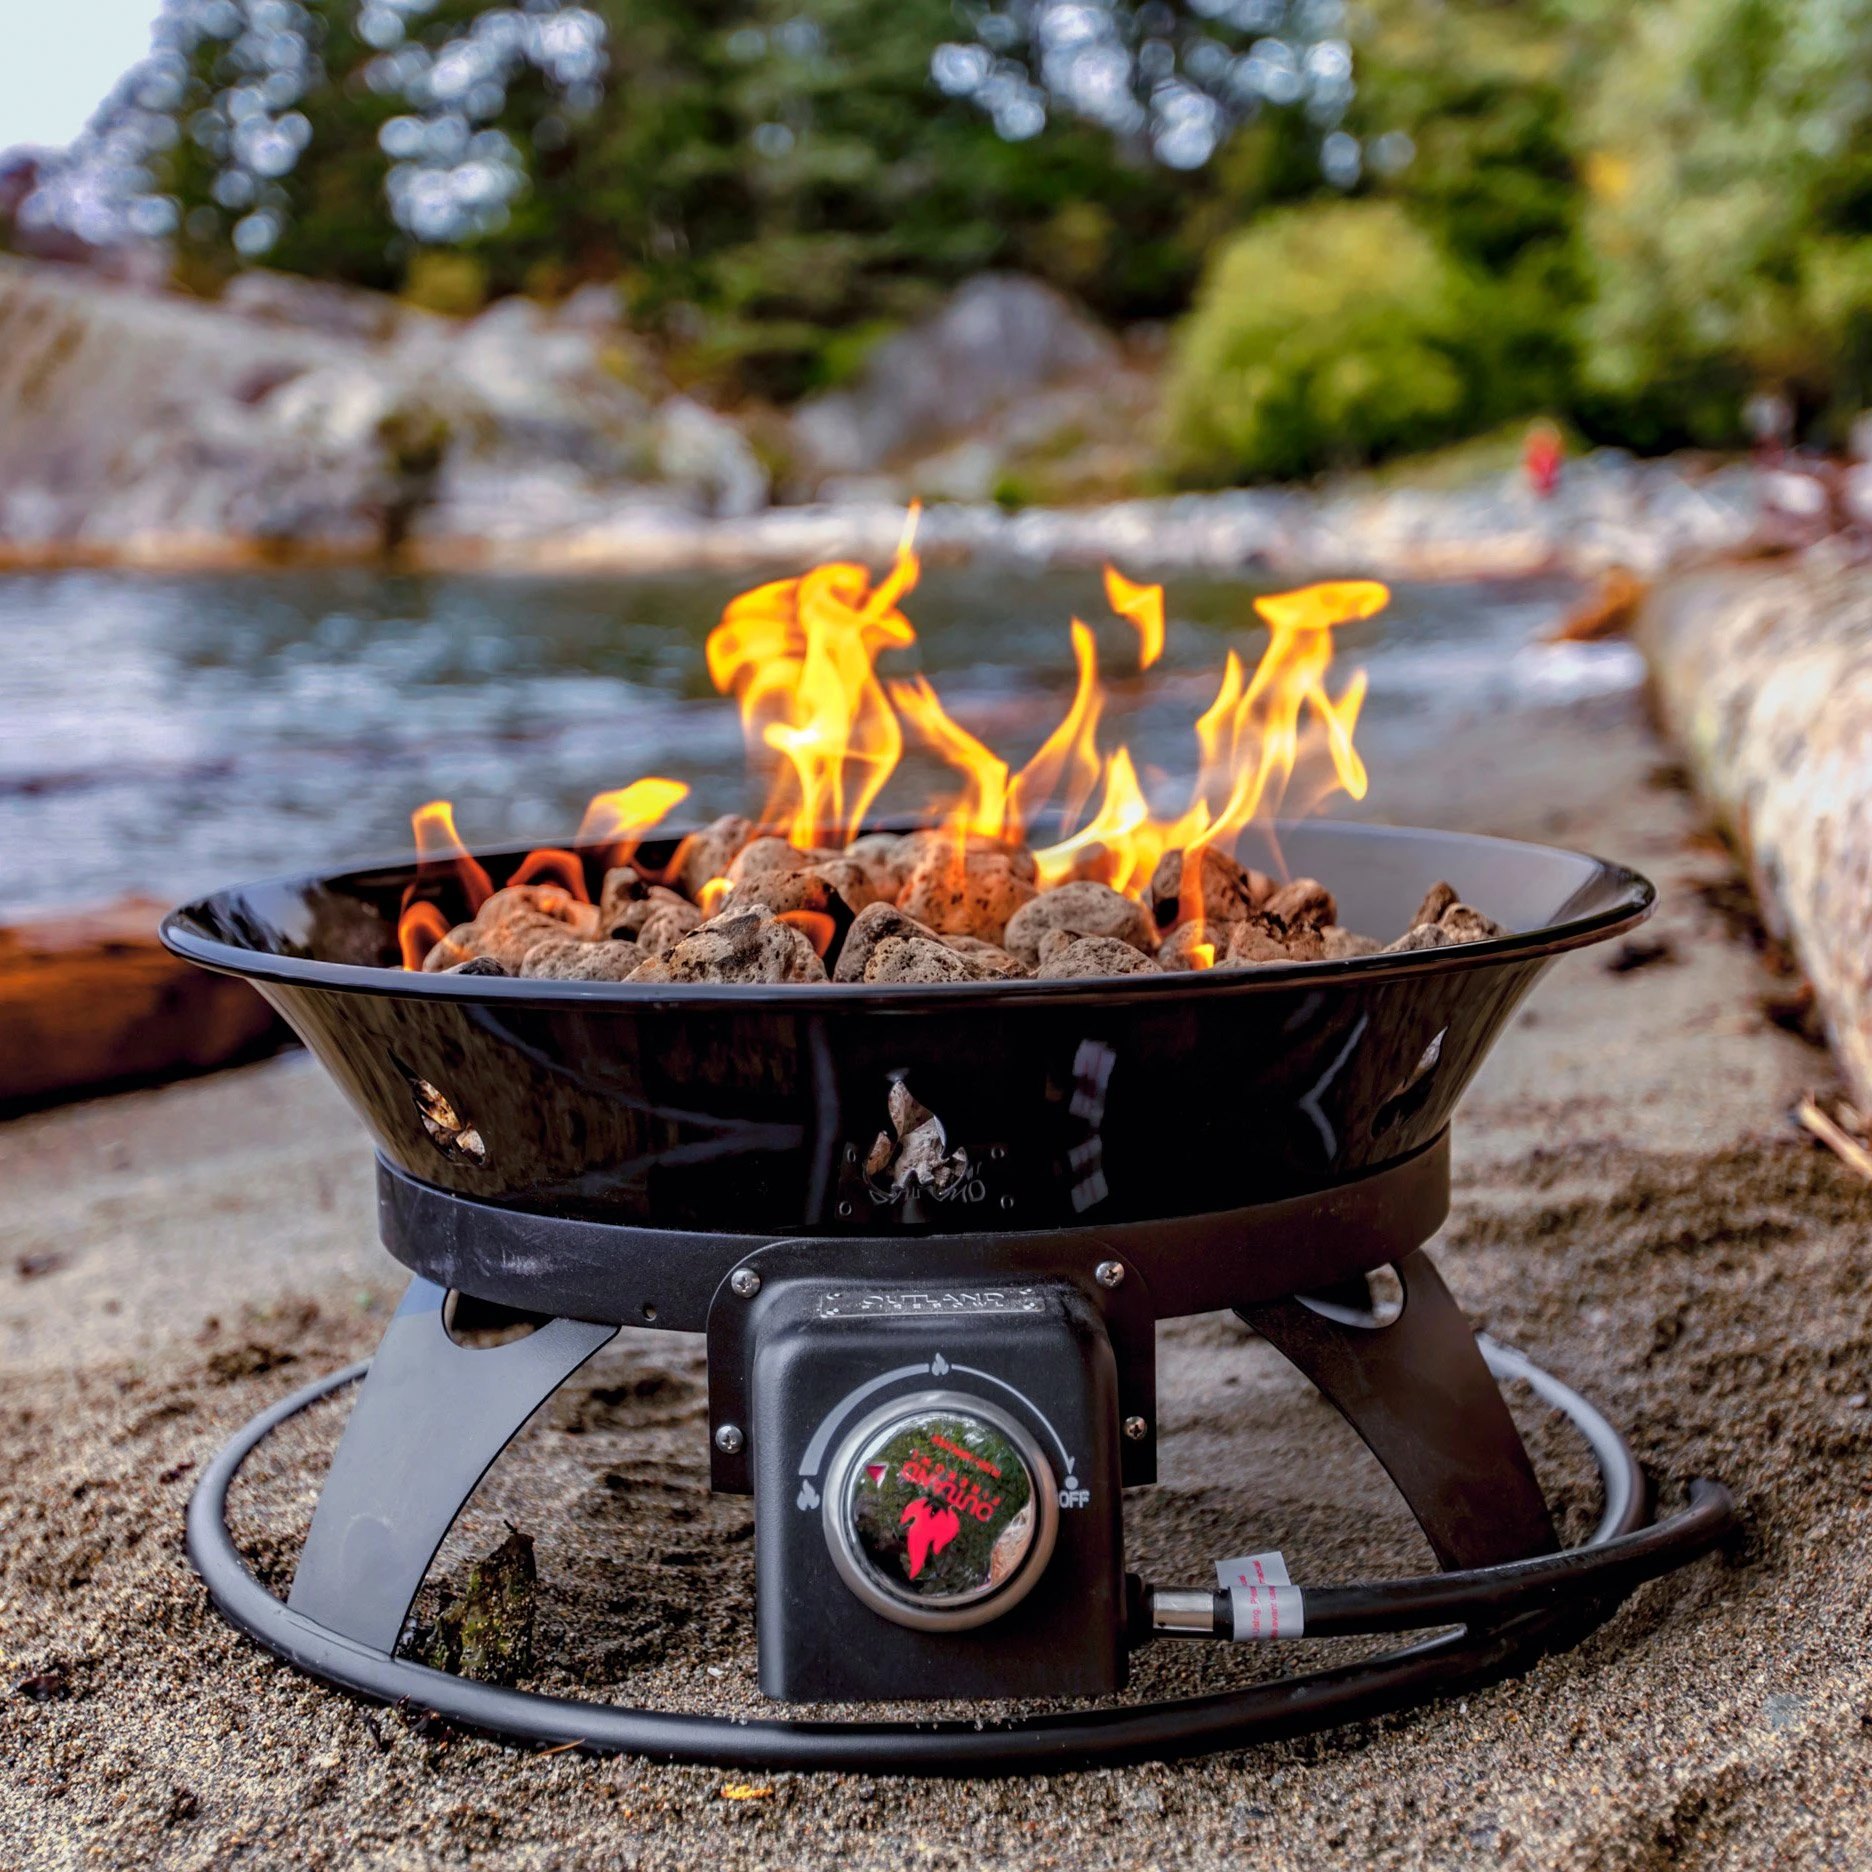 10 HIGHEST QUALITY Portable Propane Fire Pits 2022: Get Discounts!